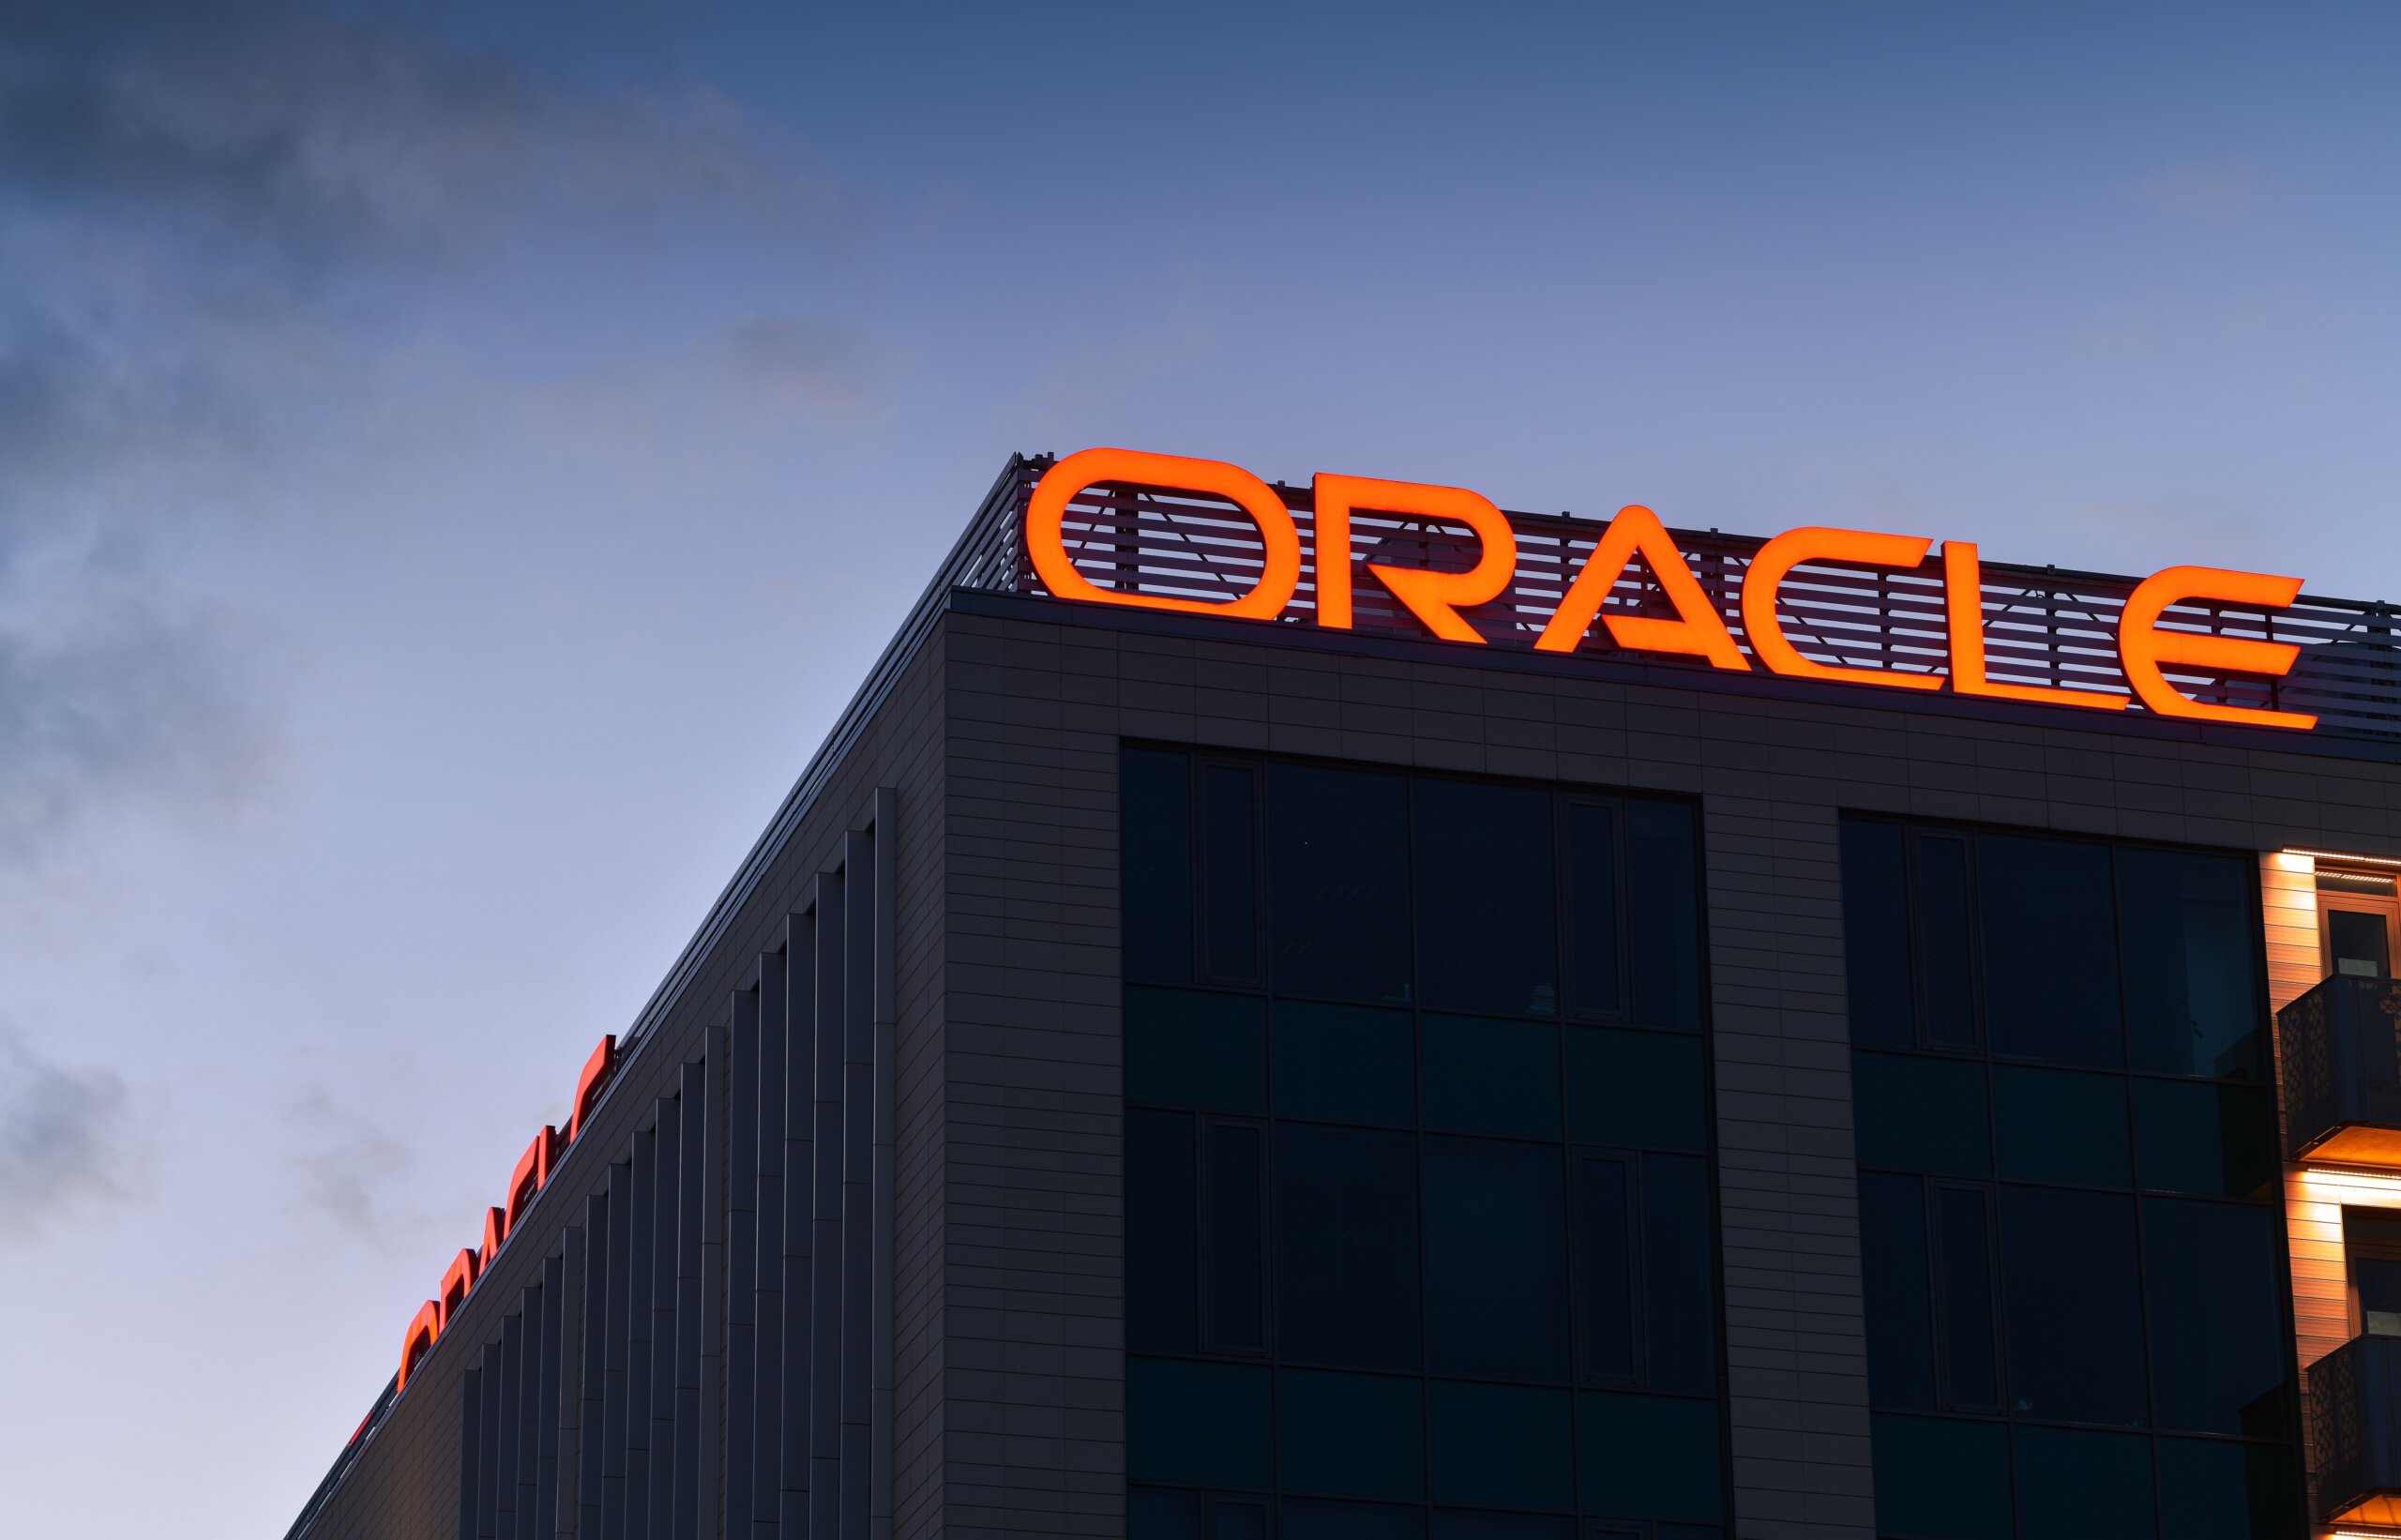 Oracle Java licensing changes and what it means for organizations